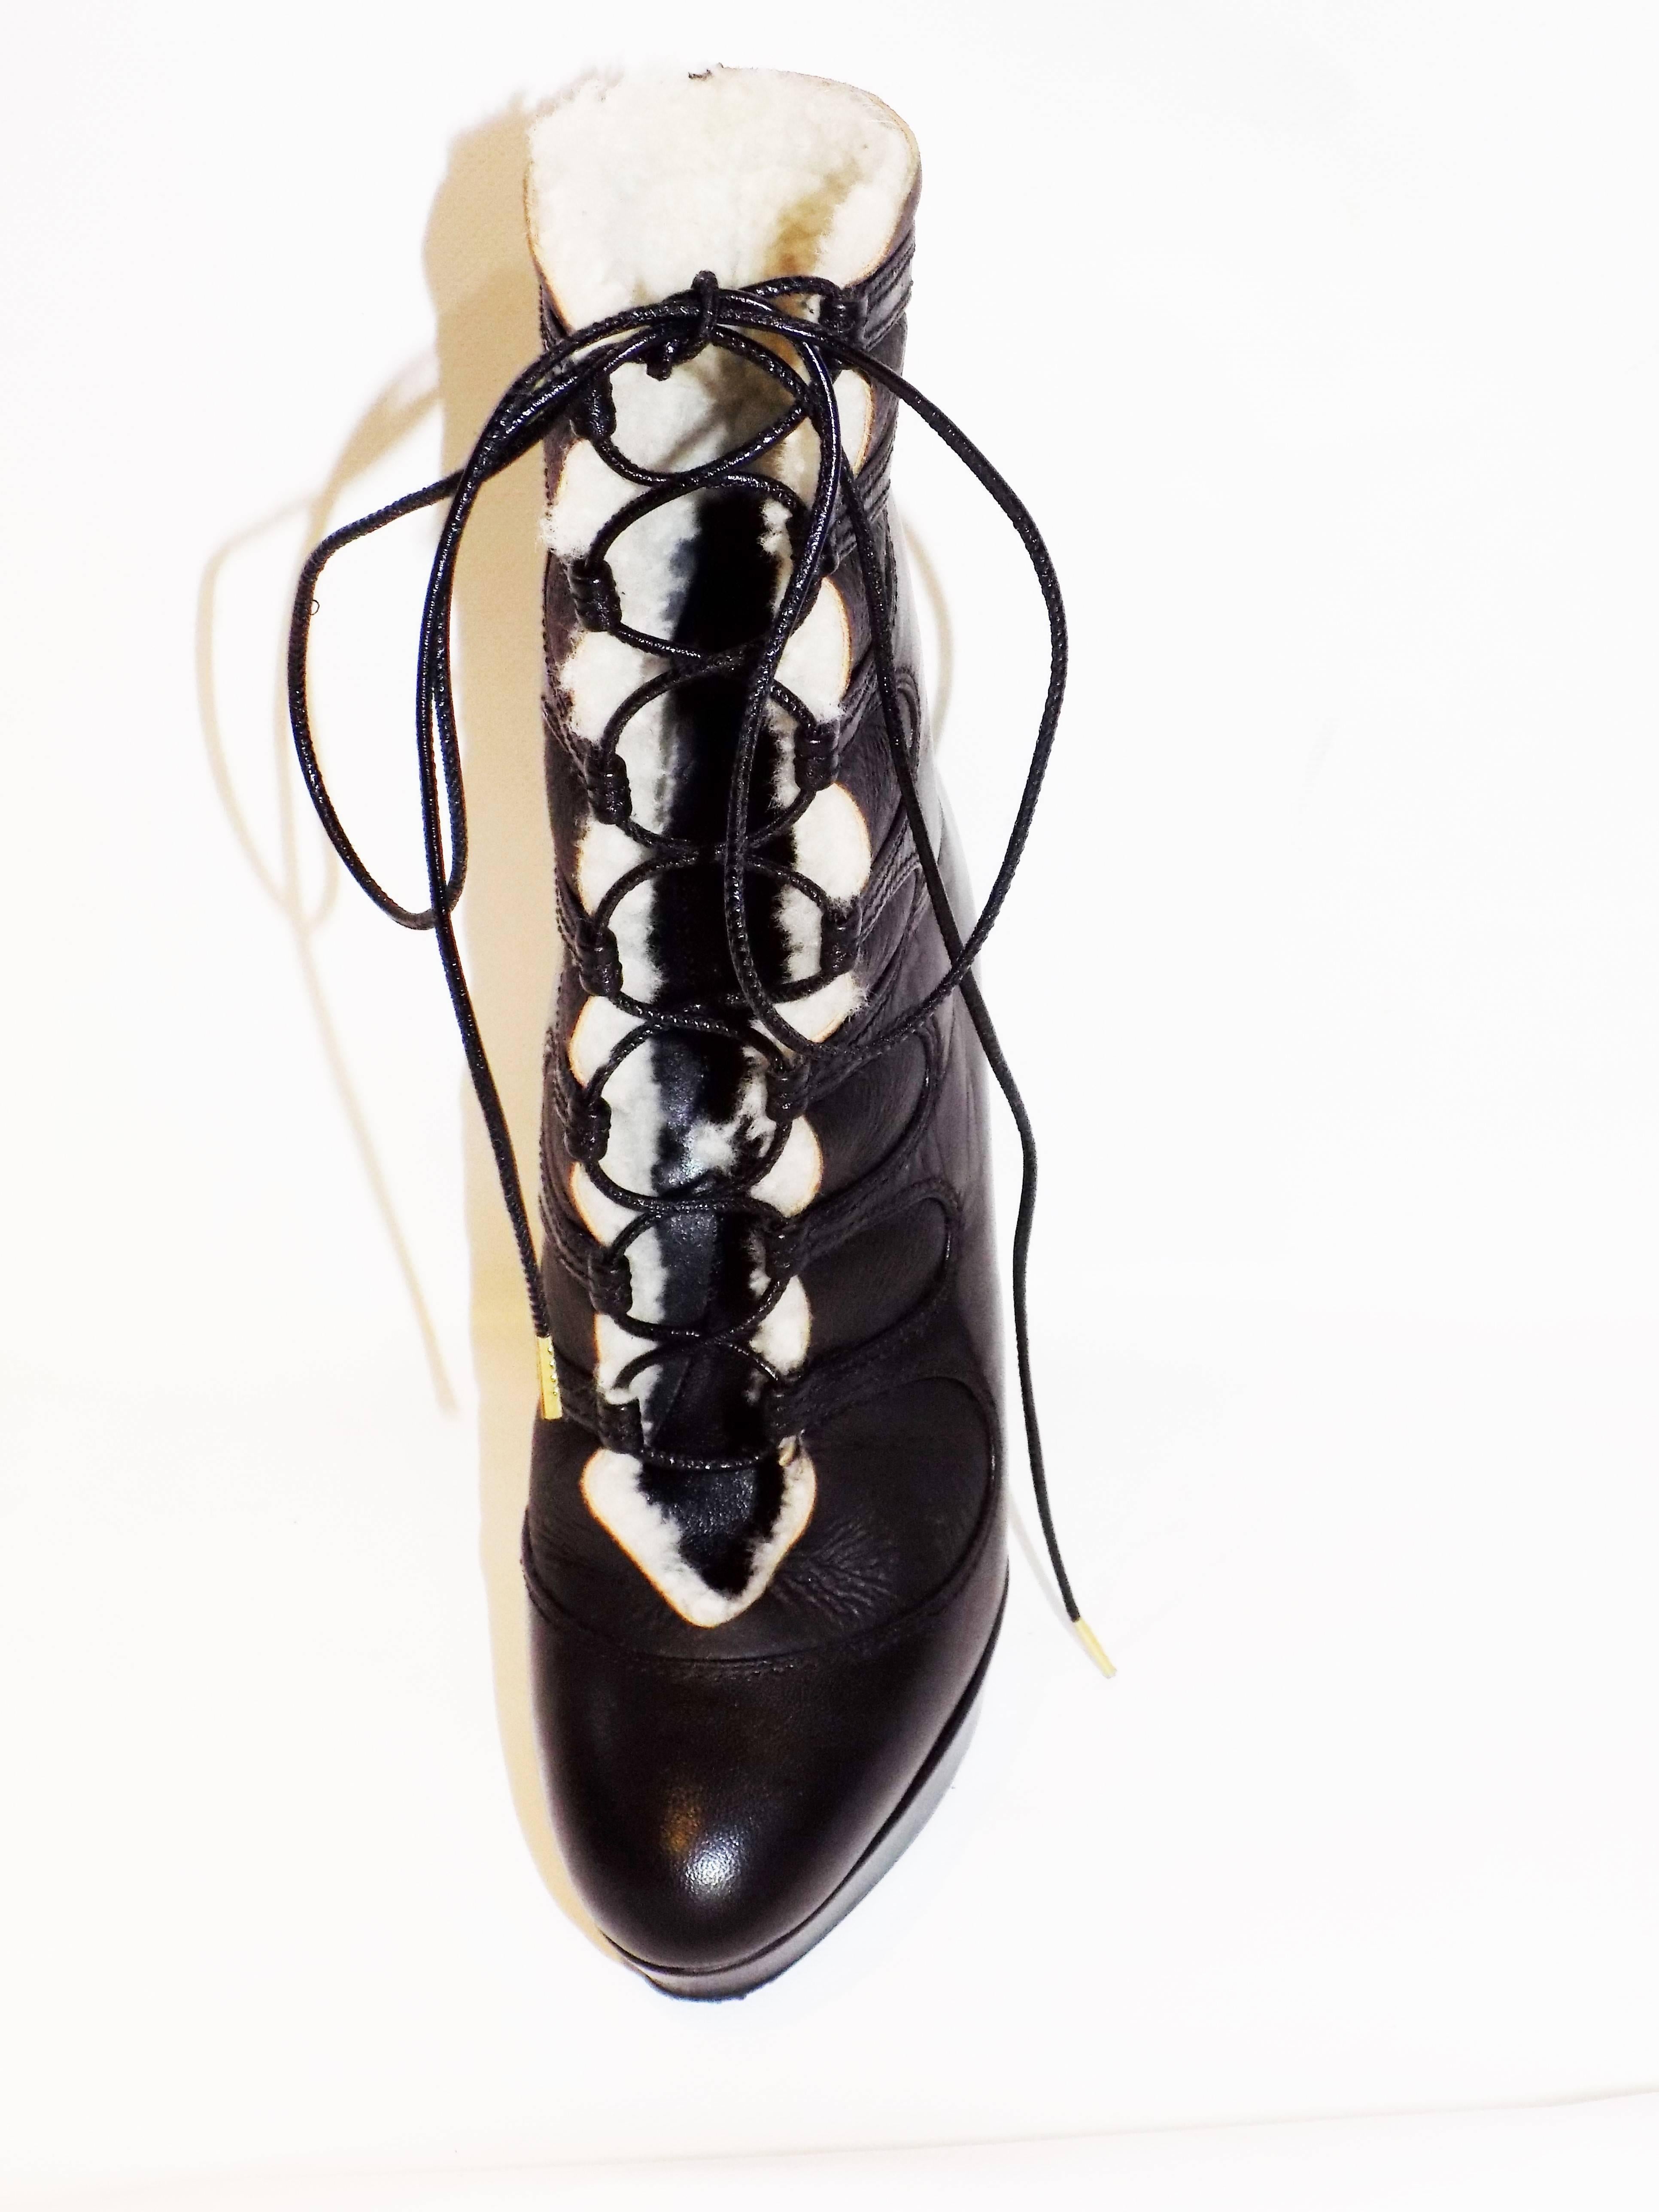 Alexander McQueen Leather Shearling Lace Up Platform  Boots  sz 36 In Excellent Condition For Sale In New York, NY